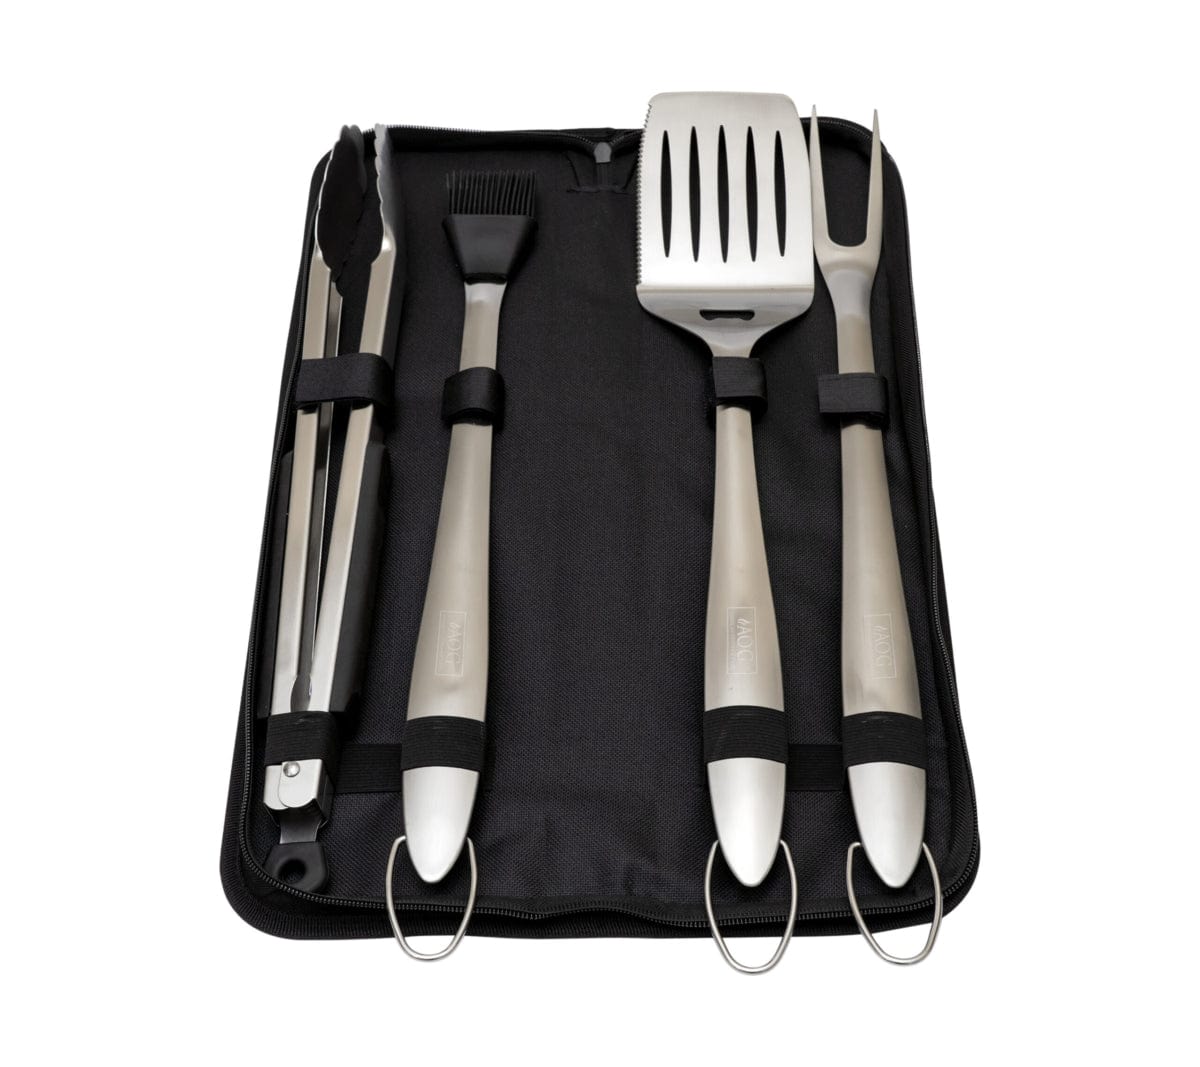 American Outdoor Grill Home American Outdoor Grill 4 piece Tool Kit - TK-1